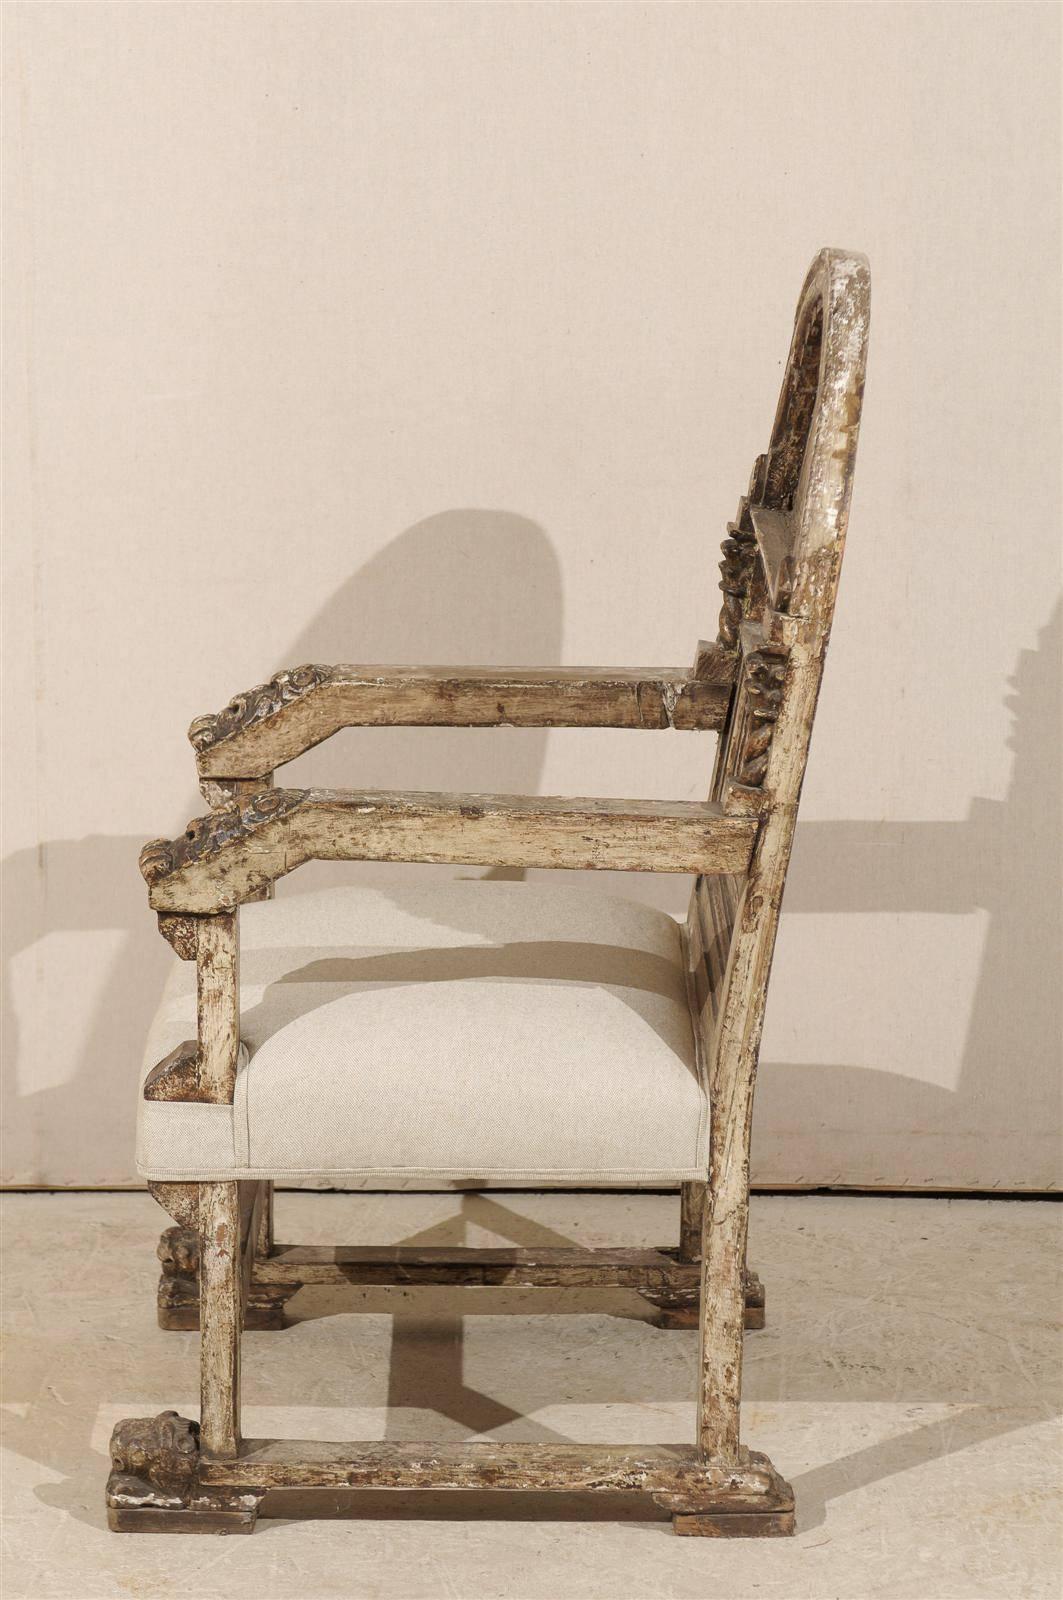 A Stately Italian Richly-Carved Wooden Chair with Elegant Aging, Early 19th C.  4